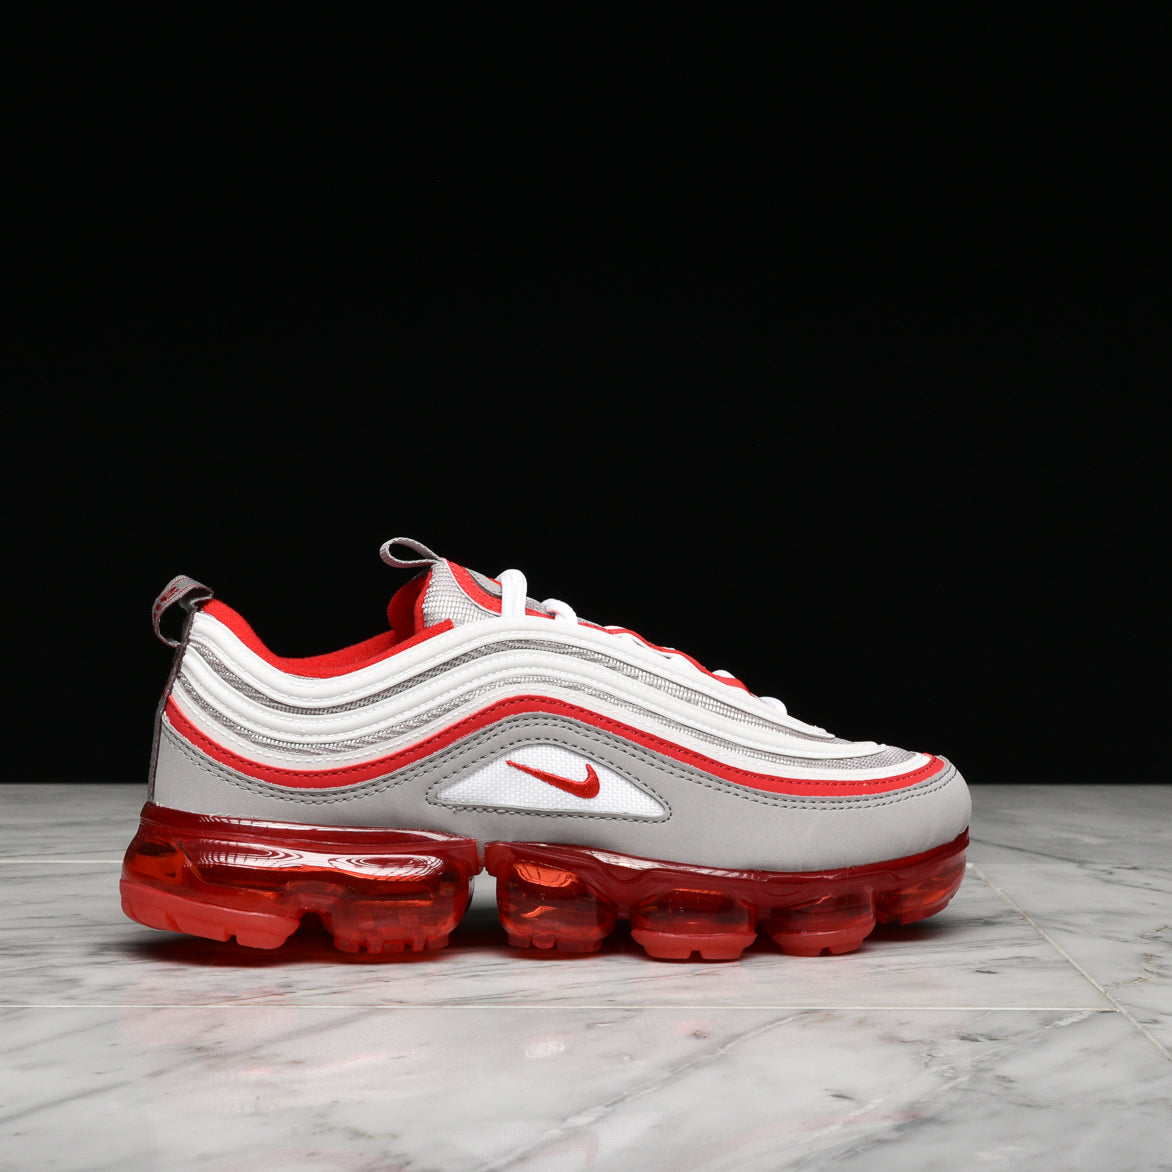 all red vapormax 97